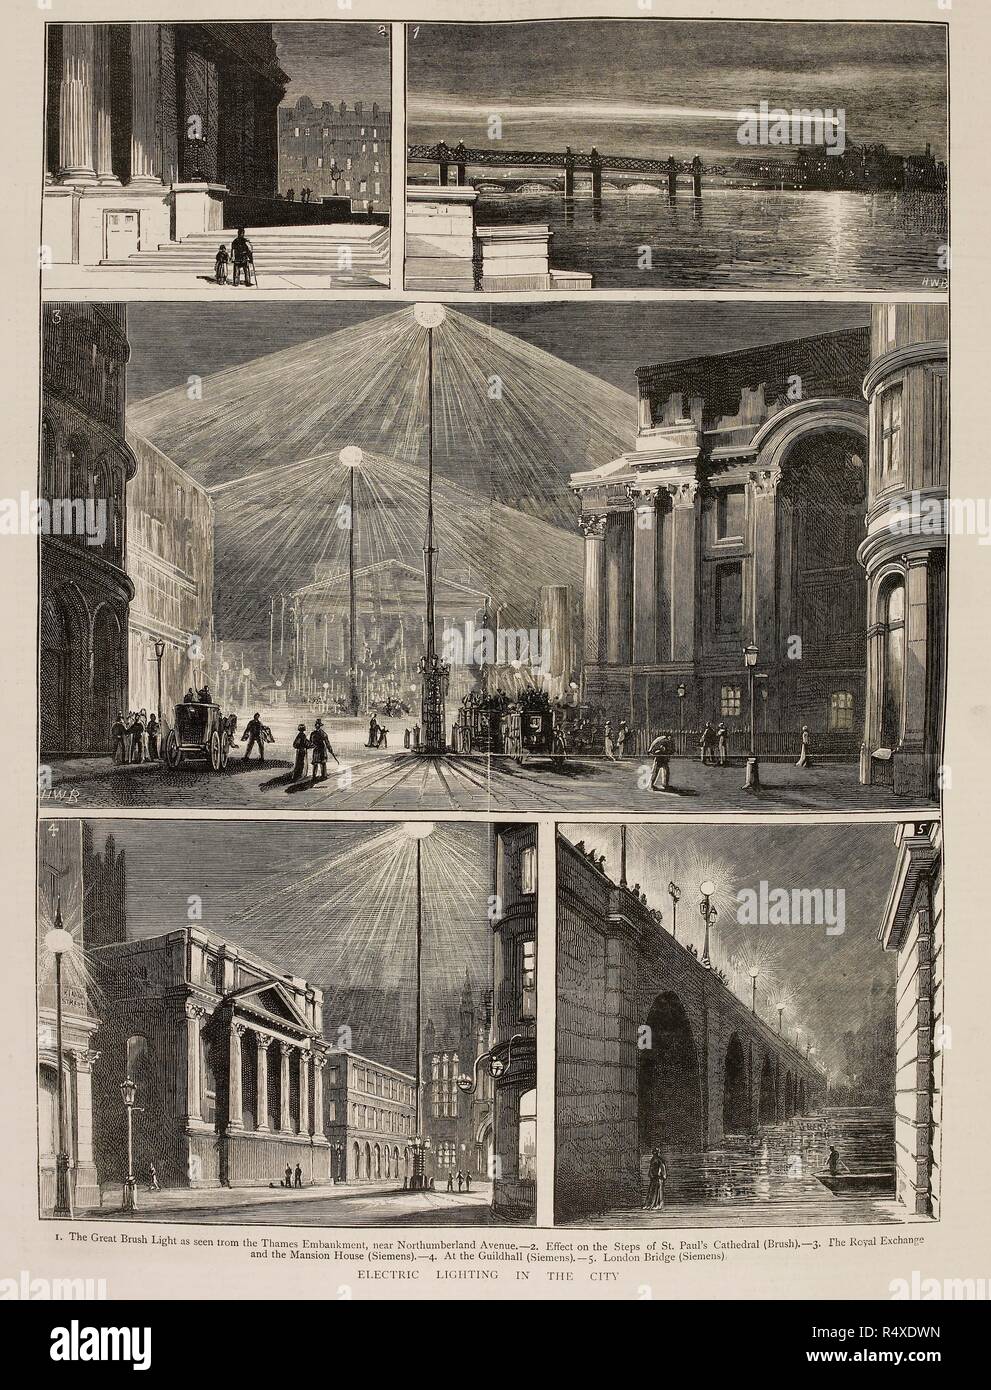 'Electric lighting in the city'. Various views of 19th century London at night, lit by the new electric lighting. The Graphic. London, 9 April 1881. Source: The Graphic 09/04/1881, p. 348. Stock Photo